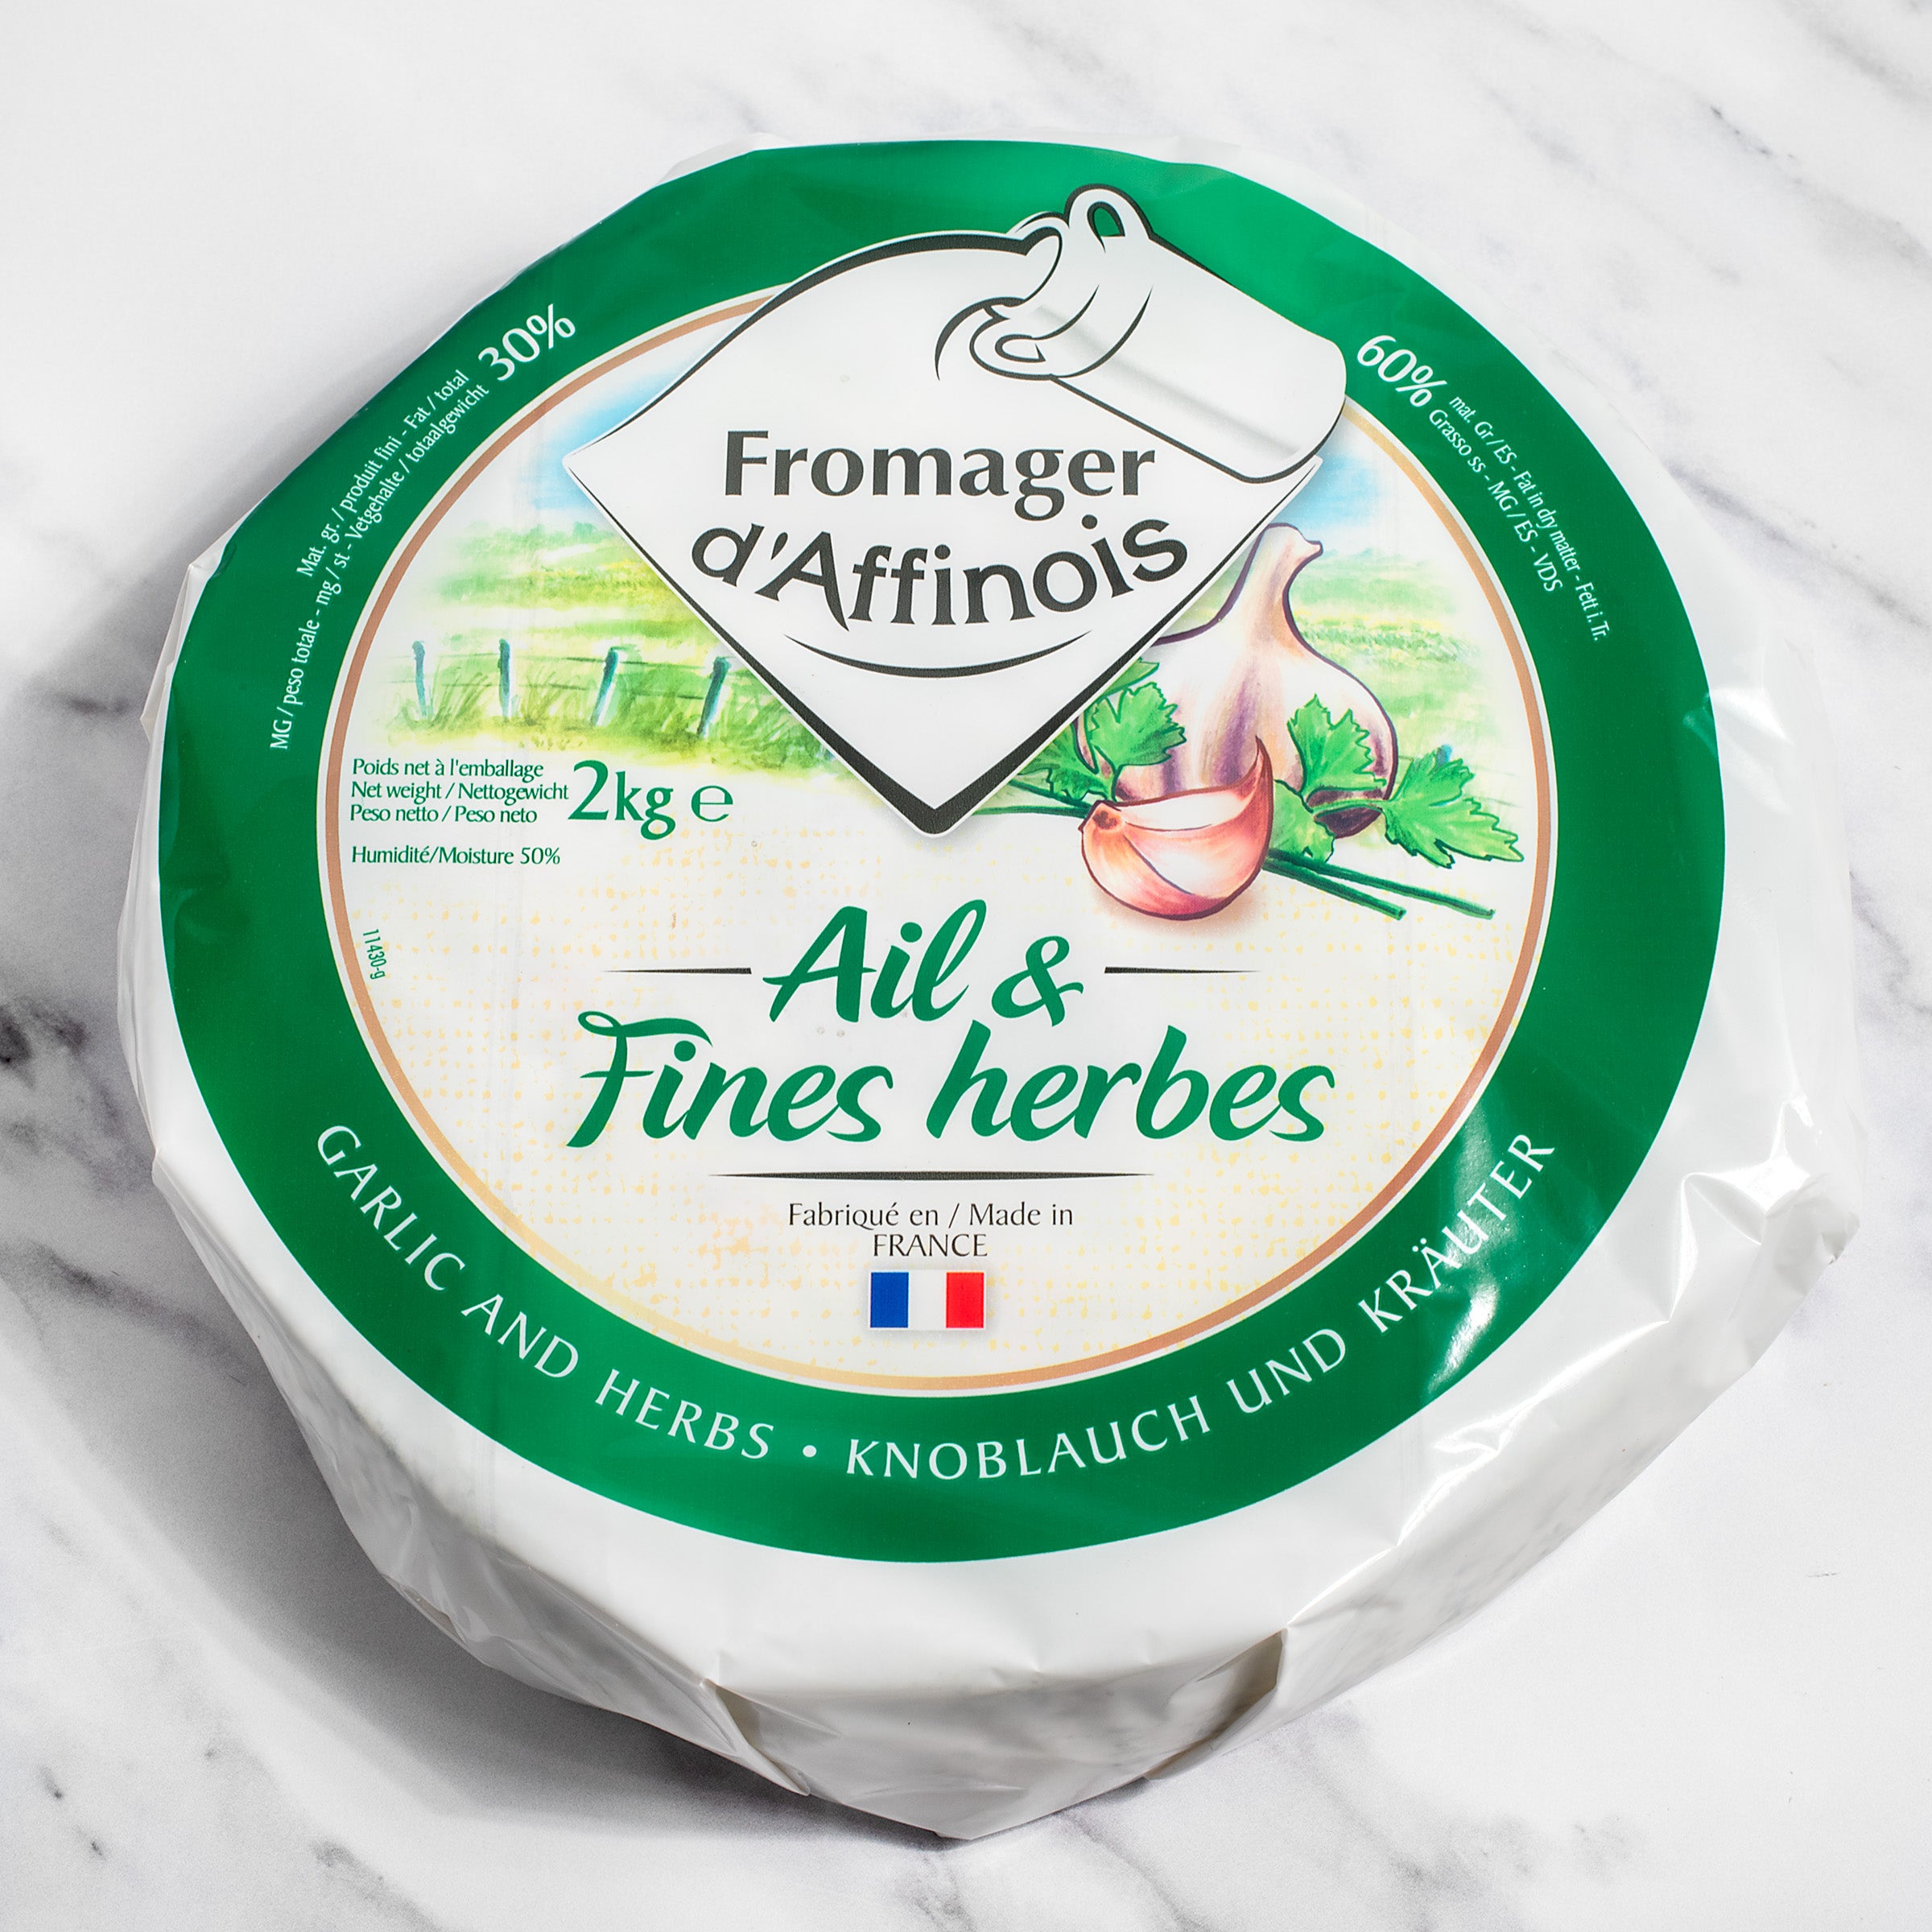 Guilloteau/Cheese – with igourmet Garlic d\'Affinois & Herb Cheese/Fromagerie Fromager